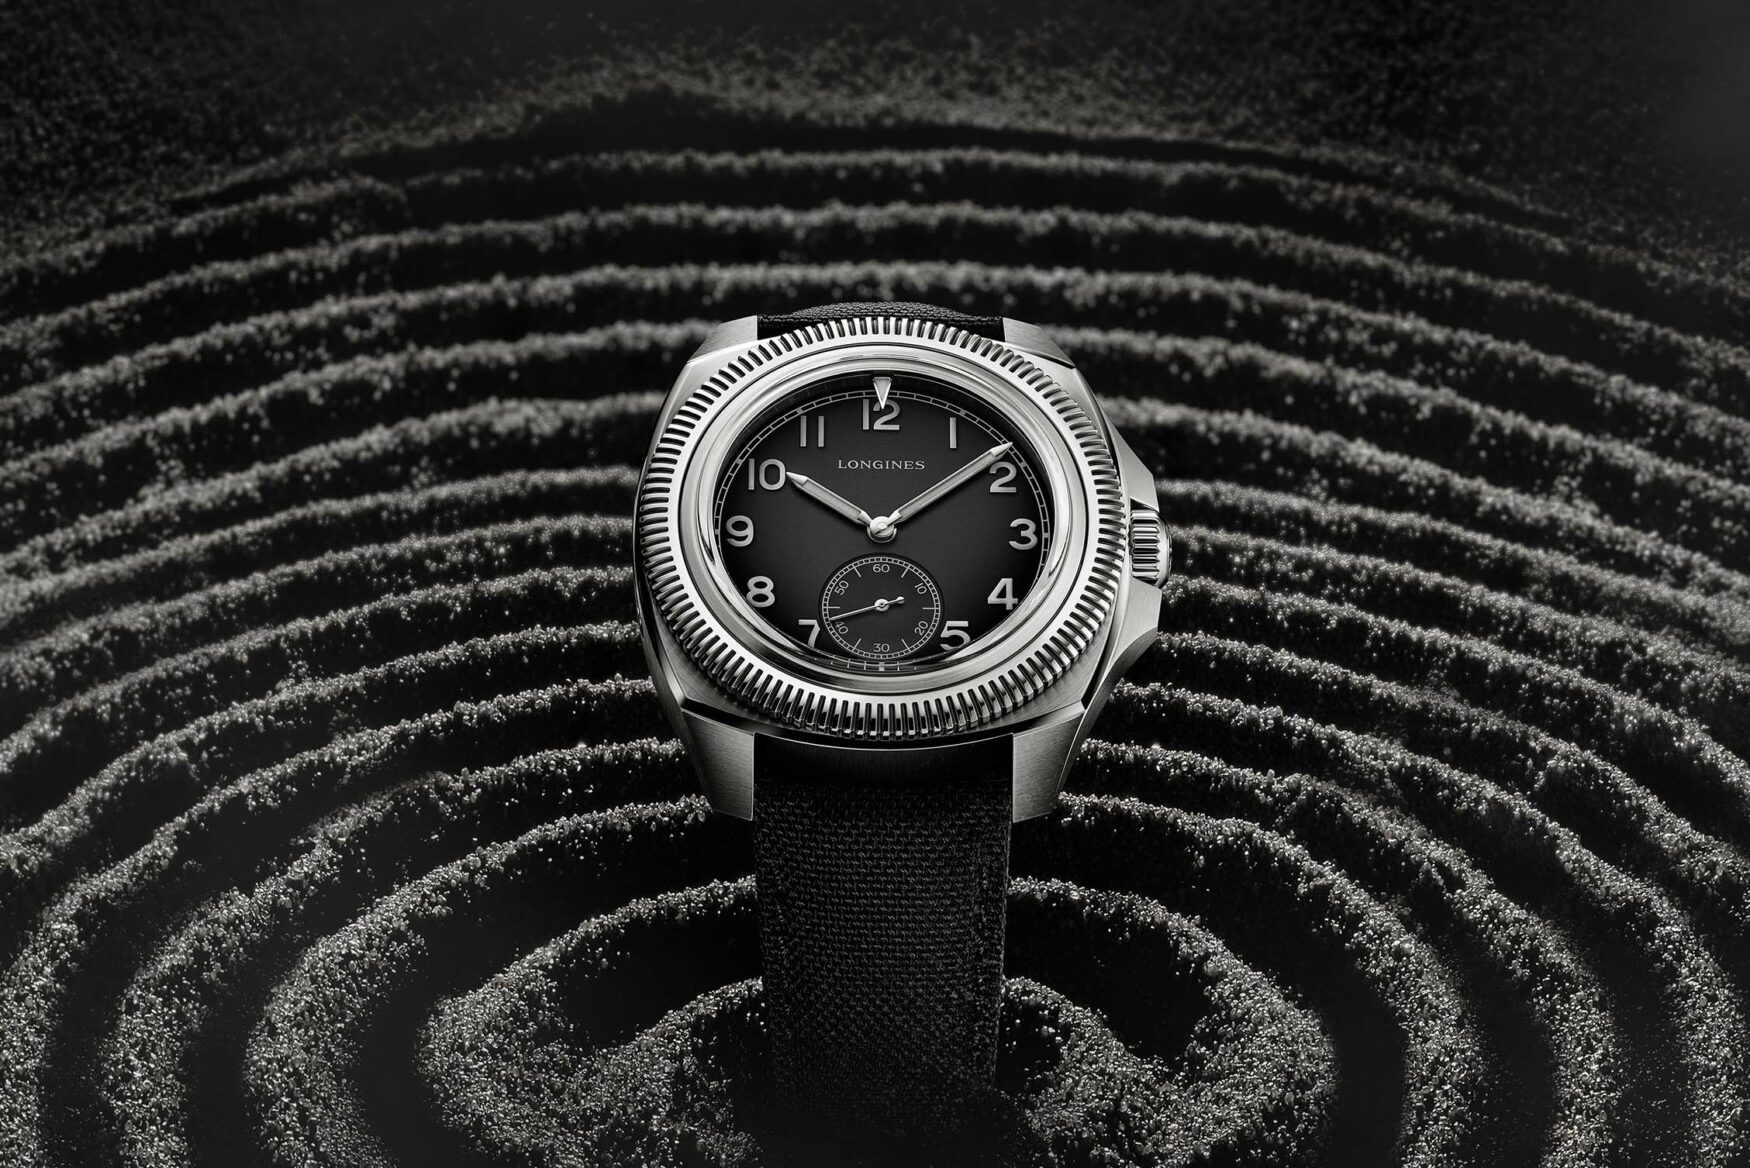 The Longines Majetek Pioneer Edition is a titanium, greyscale re-edition of a 1930s pilot watch